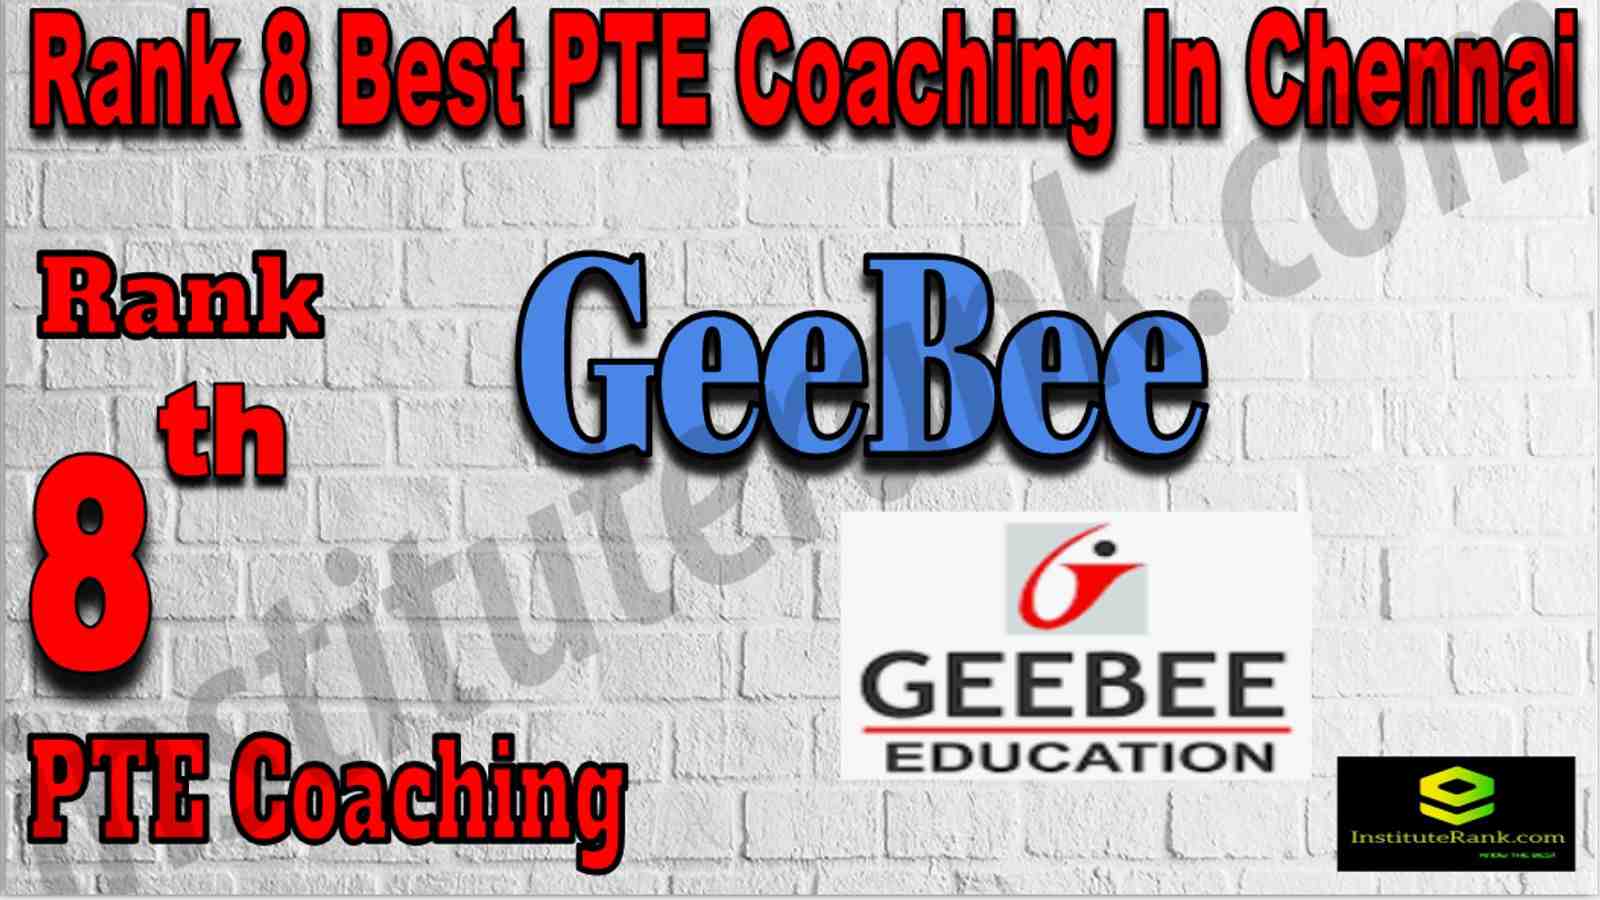 8th Best PTE Coaching In Chennai